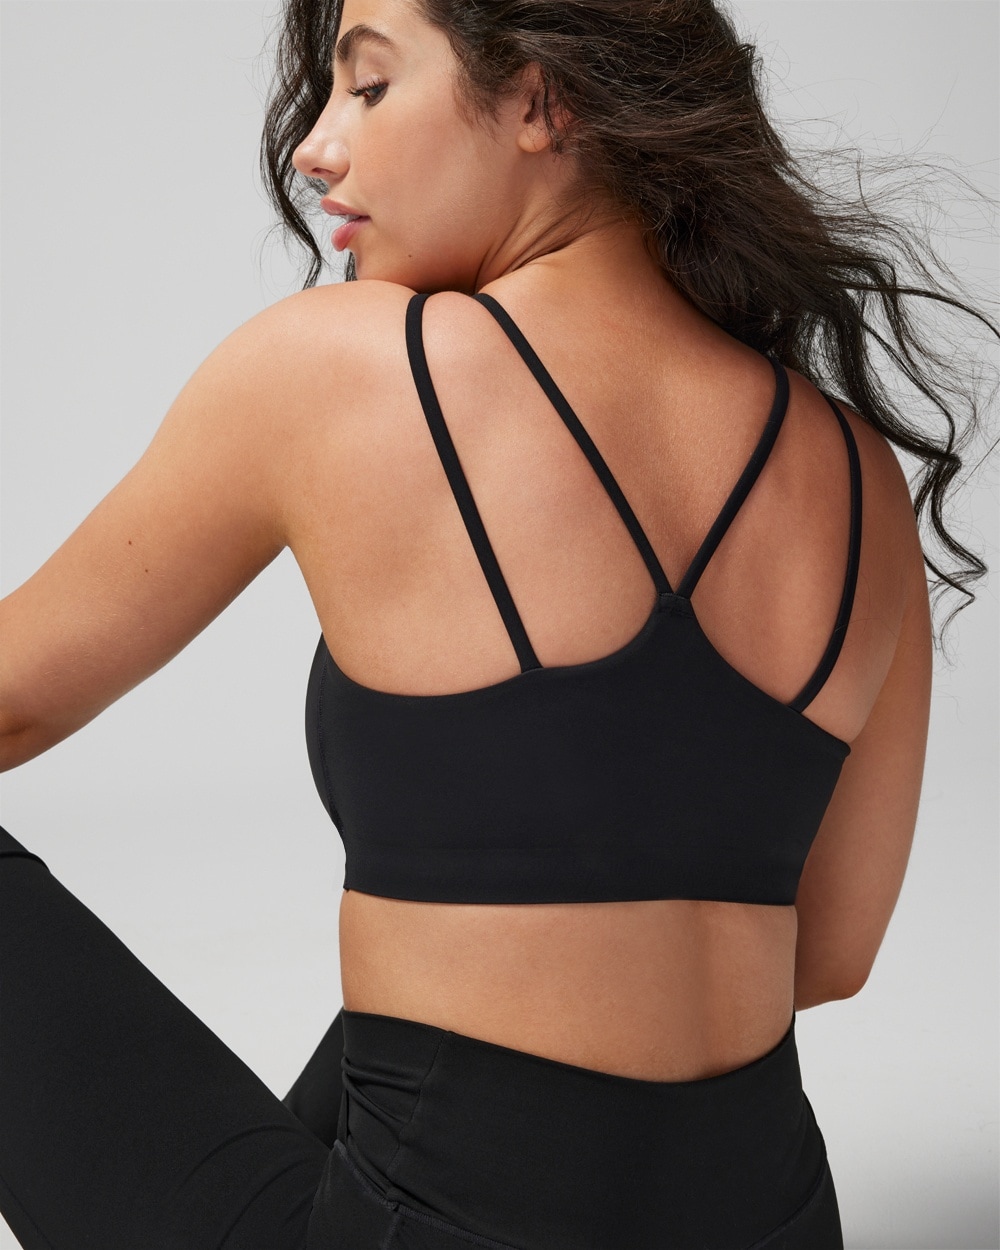 Womens Breathable Longline Yoga Sports Bra Seamless, Light Support With  Removable Pads From Wslly104104, $10.79